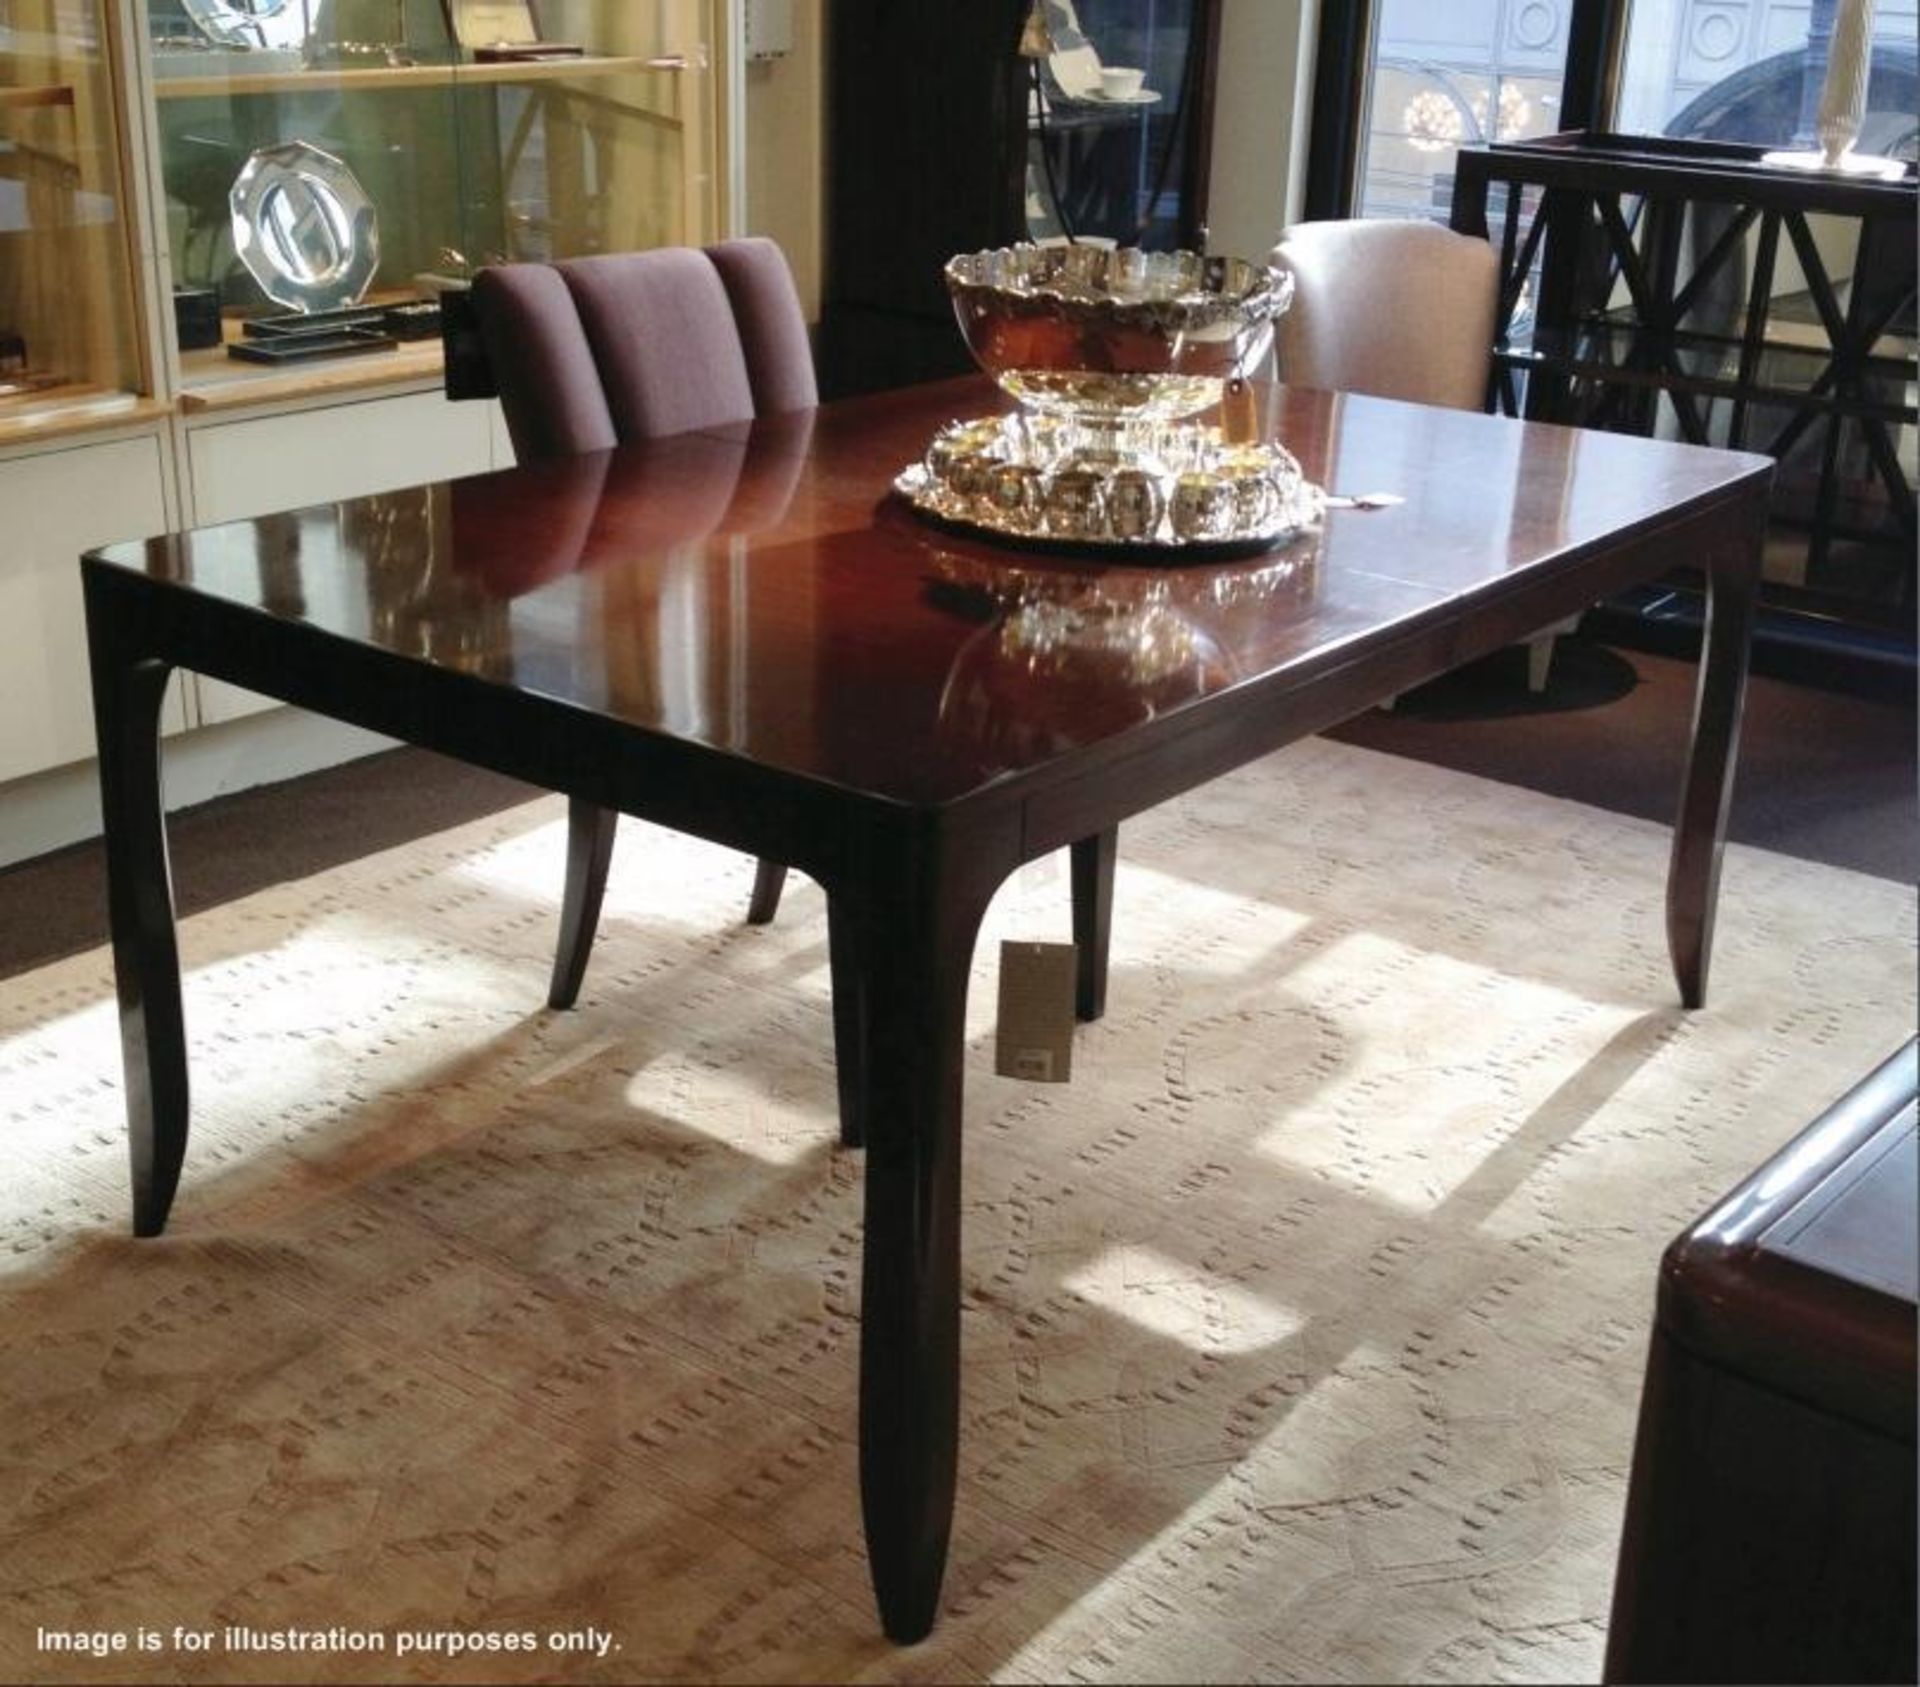 1 x BARBARA BARRY "Perfect Parsons" Dining Table In Dark Walnut - Includes Extensions Leaves - 2.8 M